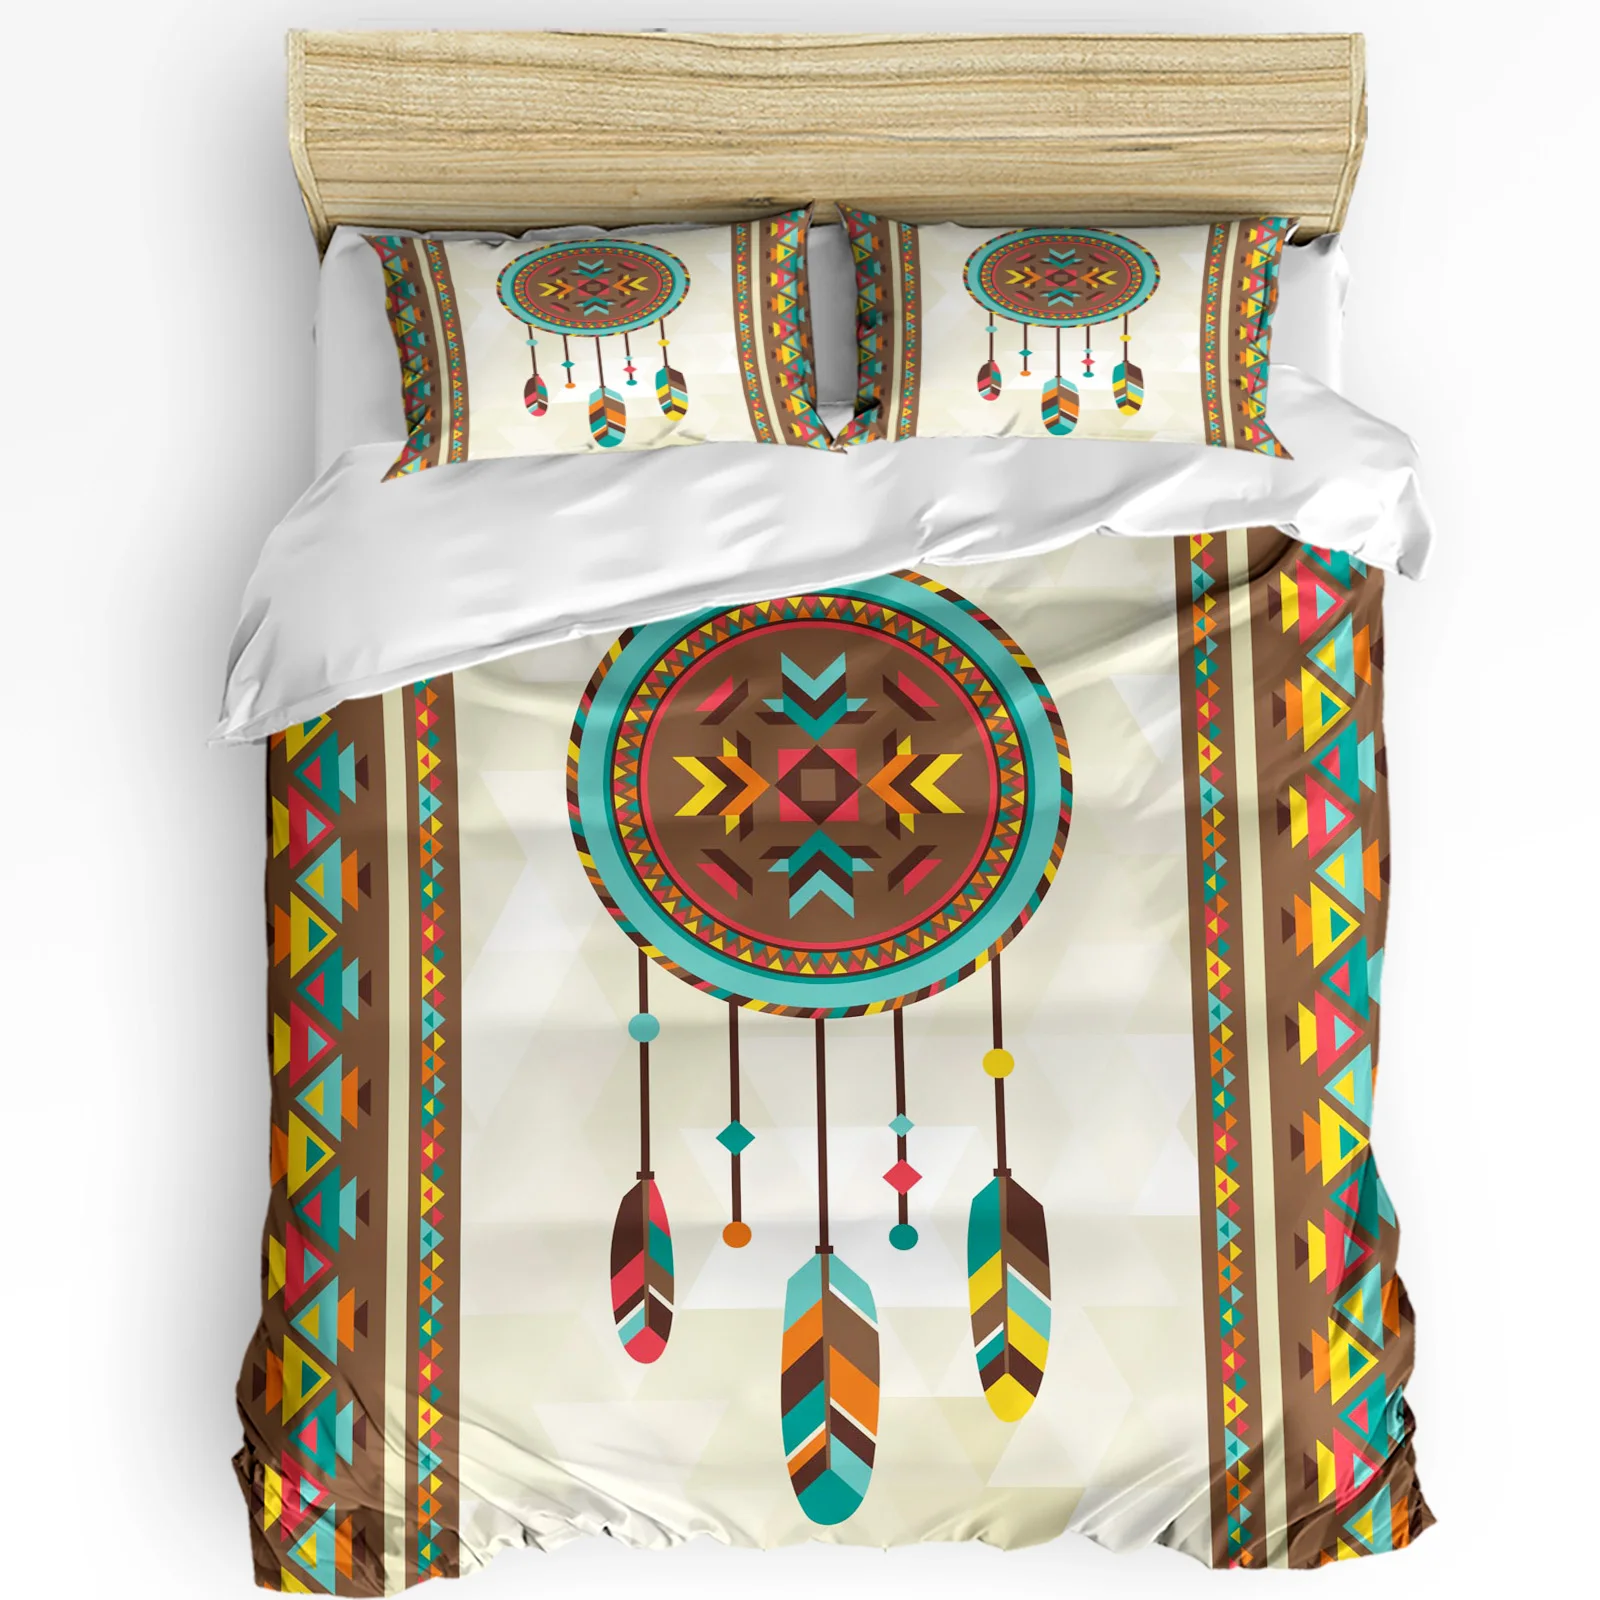 

Indian Feather Ethnic Illustration 3pcs Bedding Set For Bedroom Double Bed Home Textile Duvet Cover Quilt Cover Pillowcase